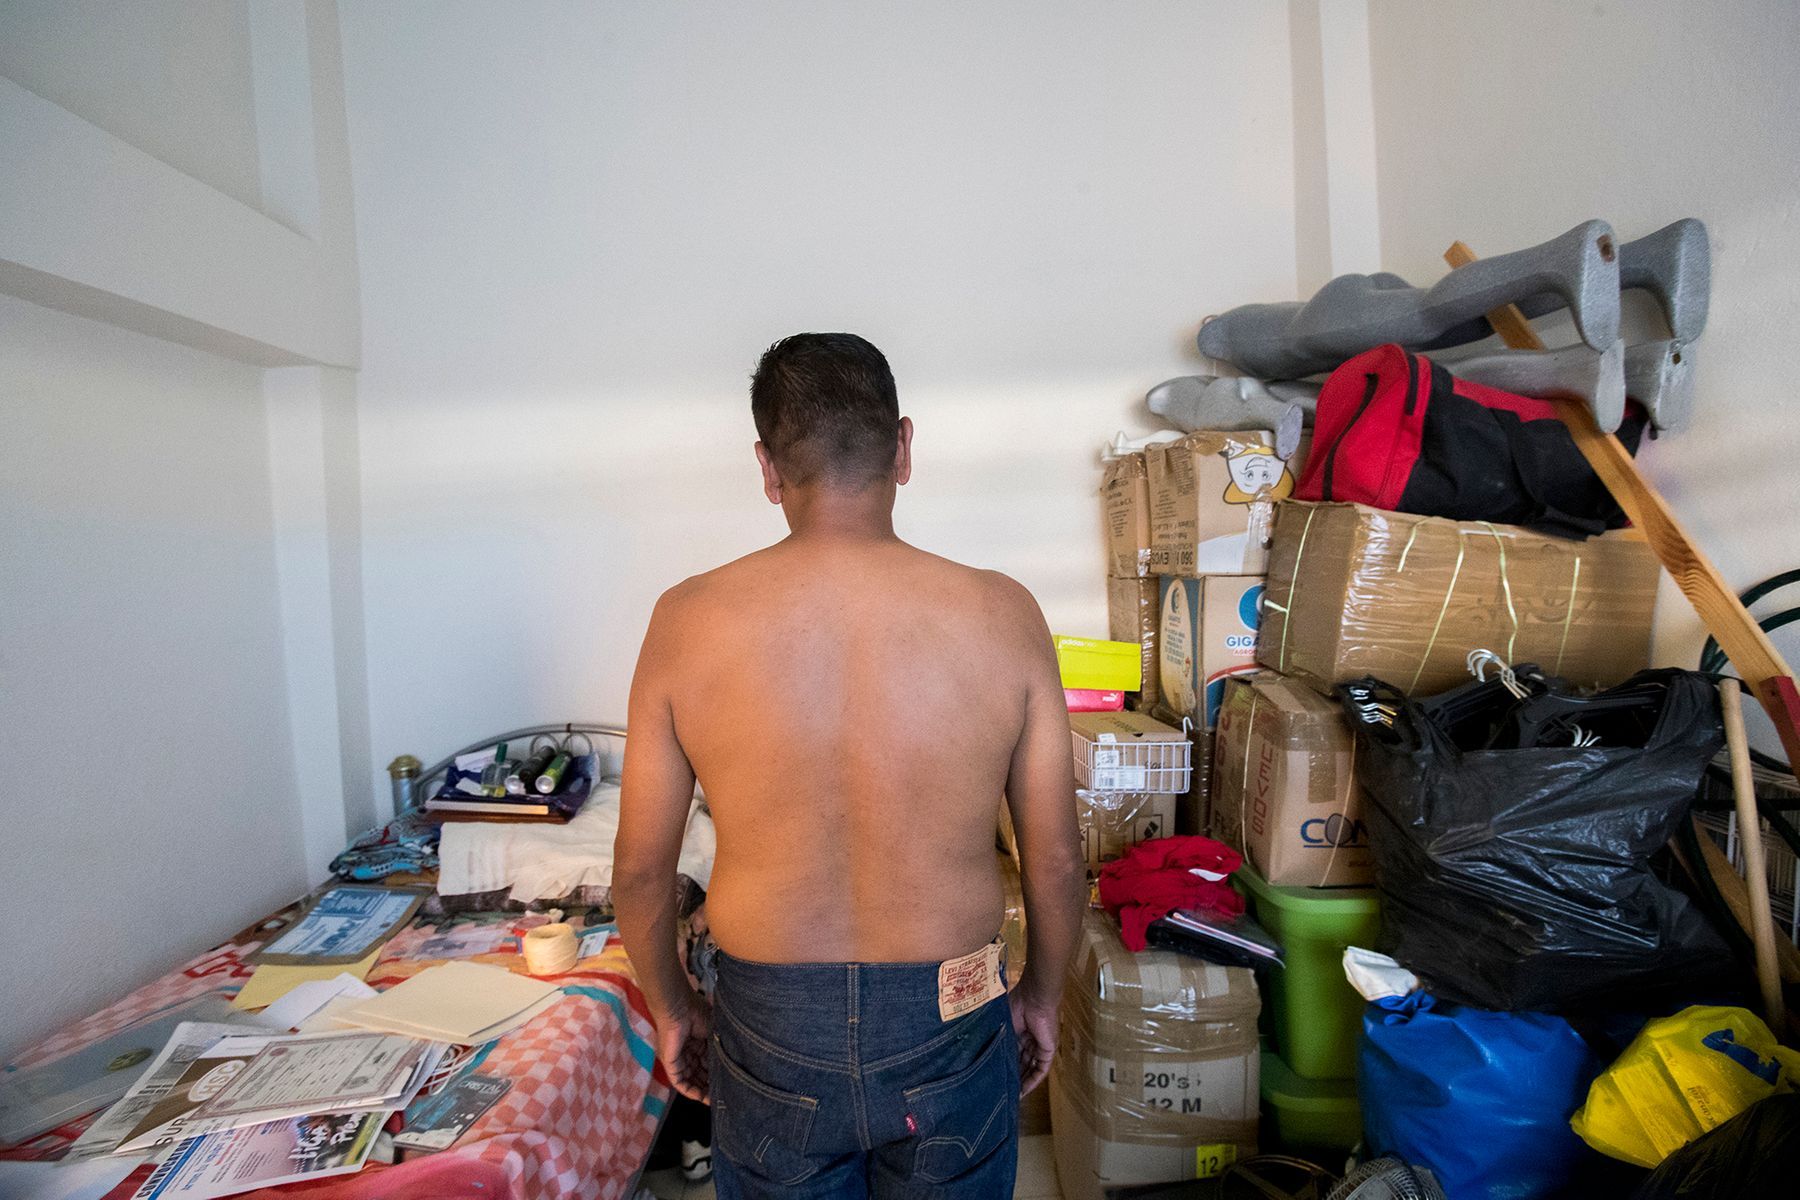 Jorge was extorted, kidnapped and beaten by criminal organizations after being deported to Guerrero. Now he lives in hiding in the neighboring state of Morelos. Image by Omar Ornelas/The Desert Sun. Mexico, 2019.